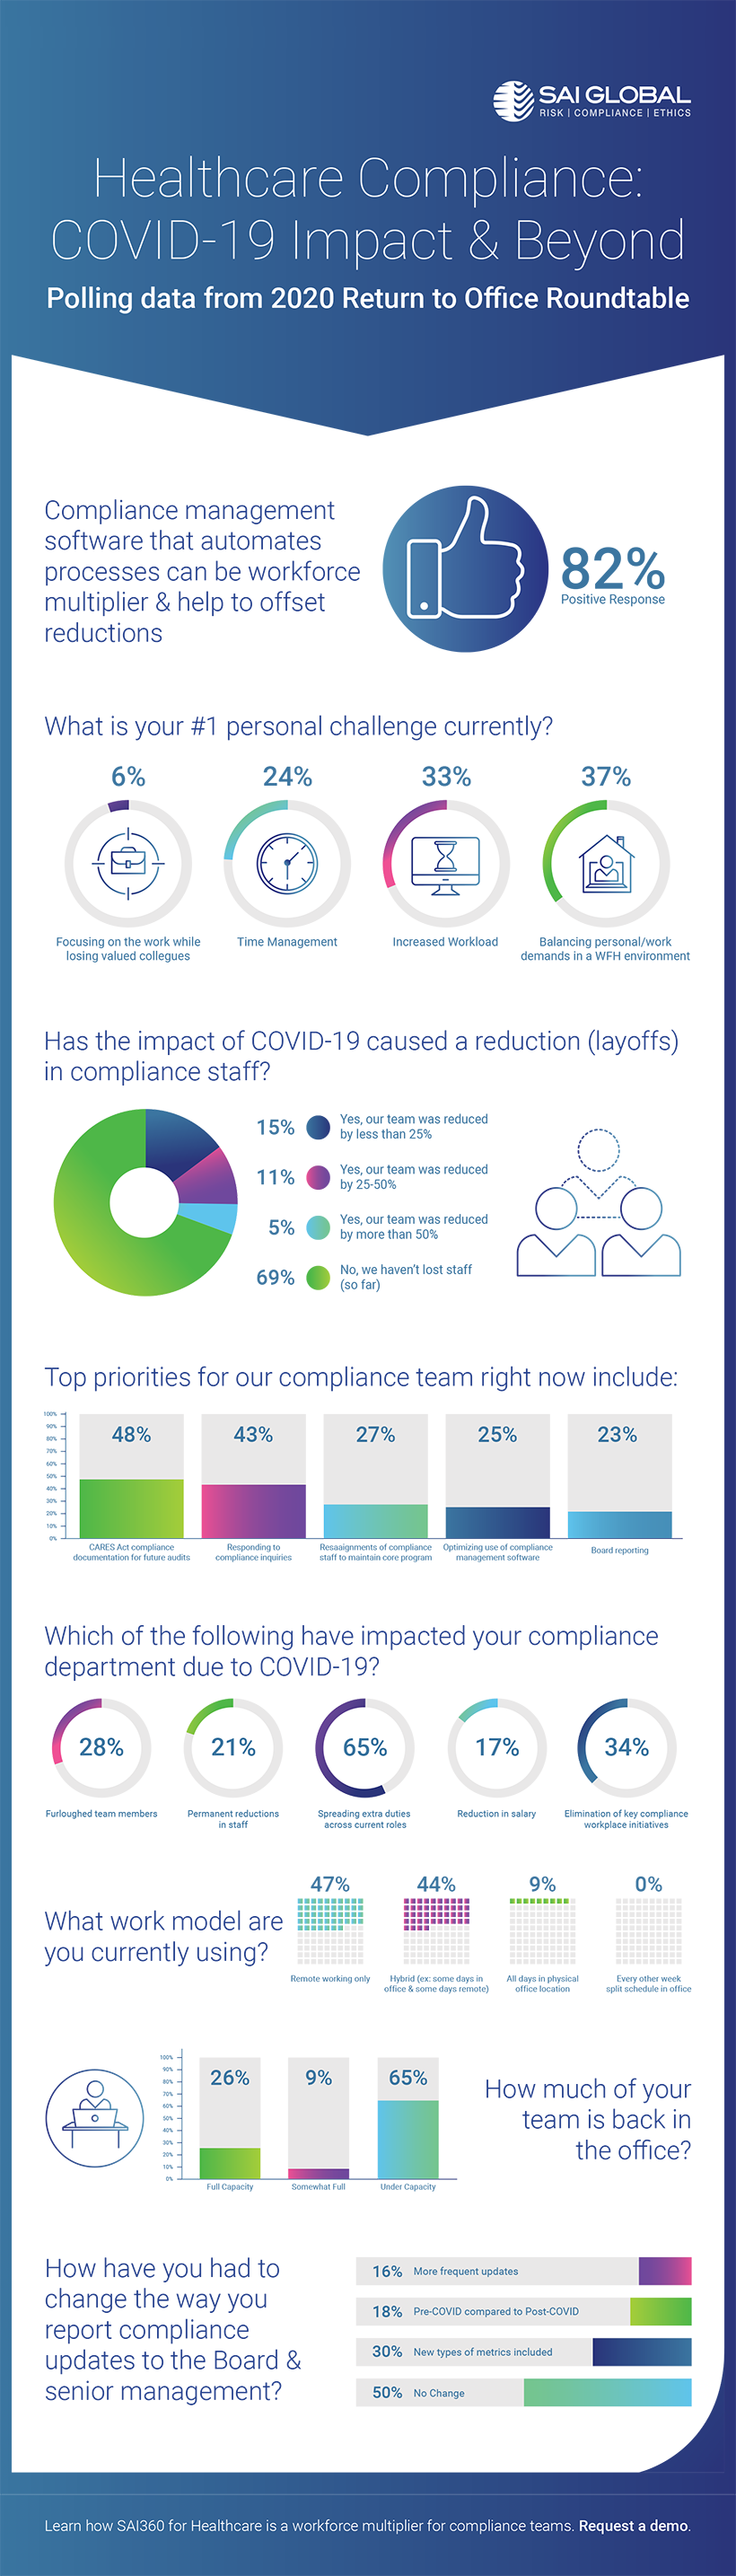 Healthcare Compliance: COVID-19 Impact and Beyond